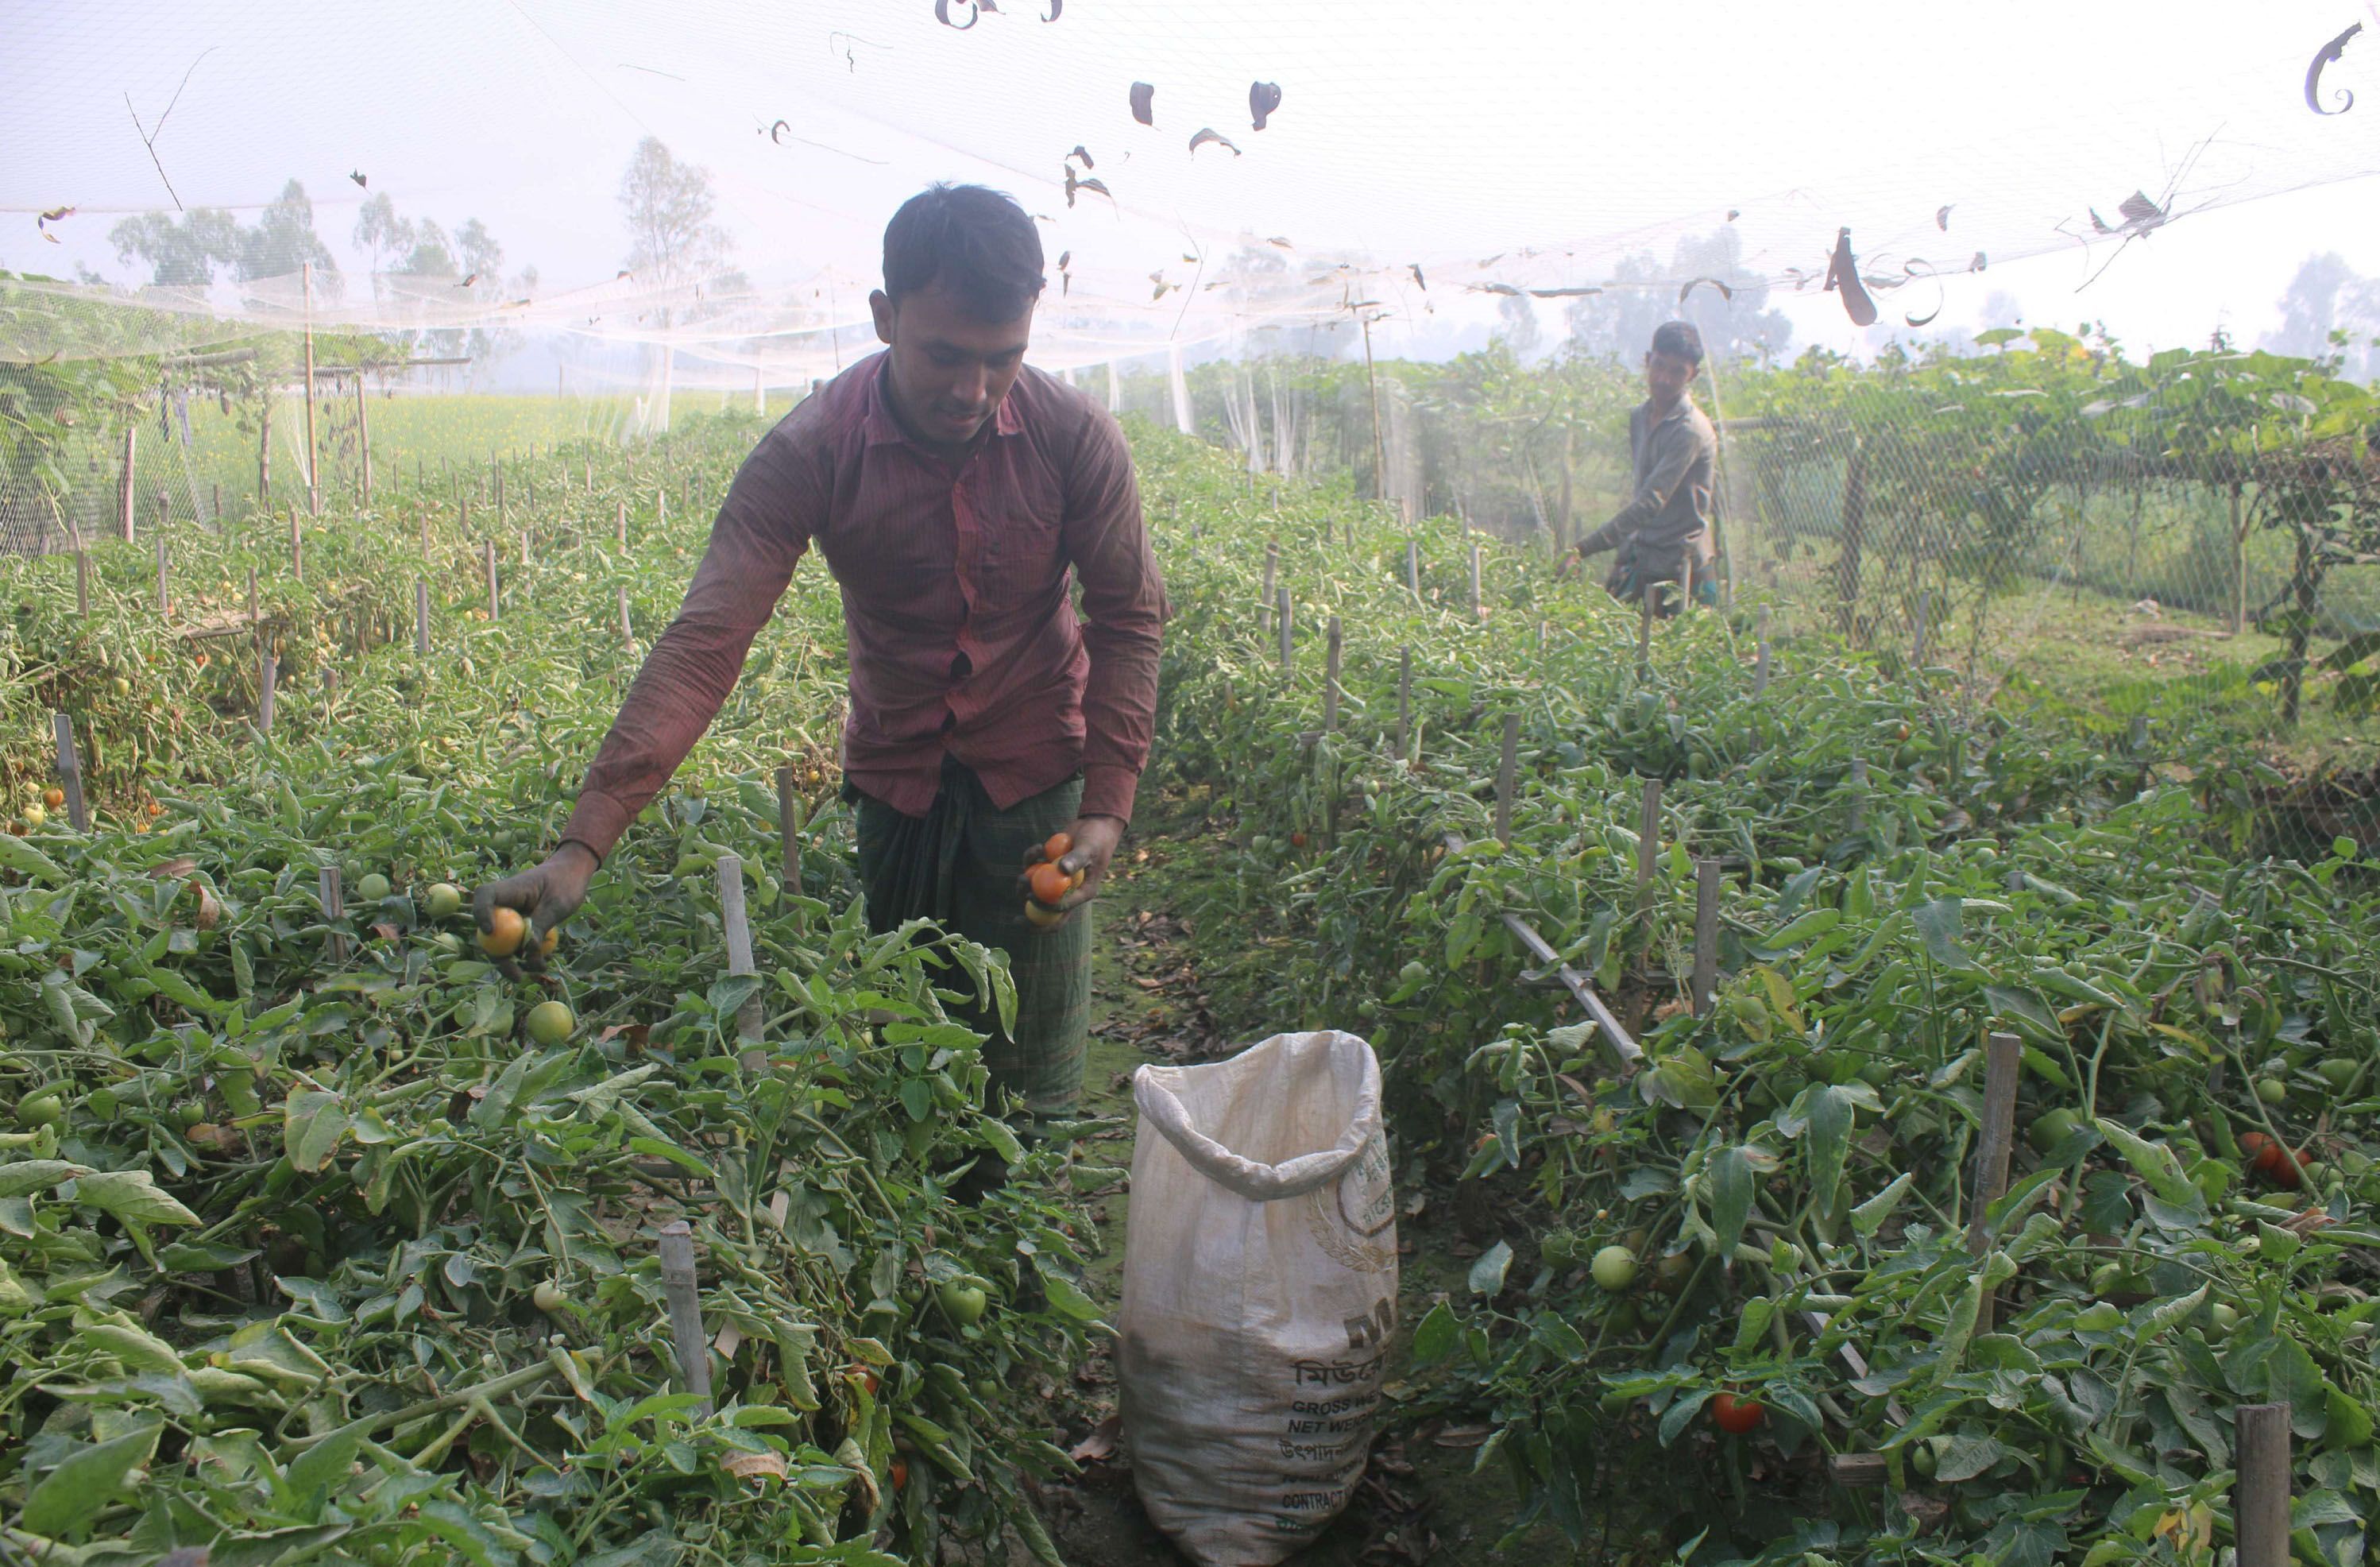 The farmers of Bogra district have been severely affected by the continuous rains and floods this year. However, in the midst of these adversities, the tomato farmers of Bogra's Dhunat upazila are hoping to make a profit by cultivating tomatoes in advance. Due to the good demand and price in the market, the farmers of this region have been cultivating tomatoes in advance with various adversities and risks.